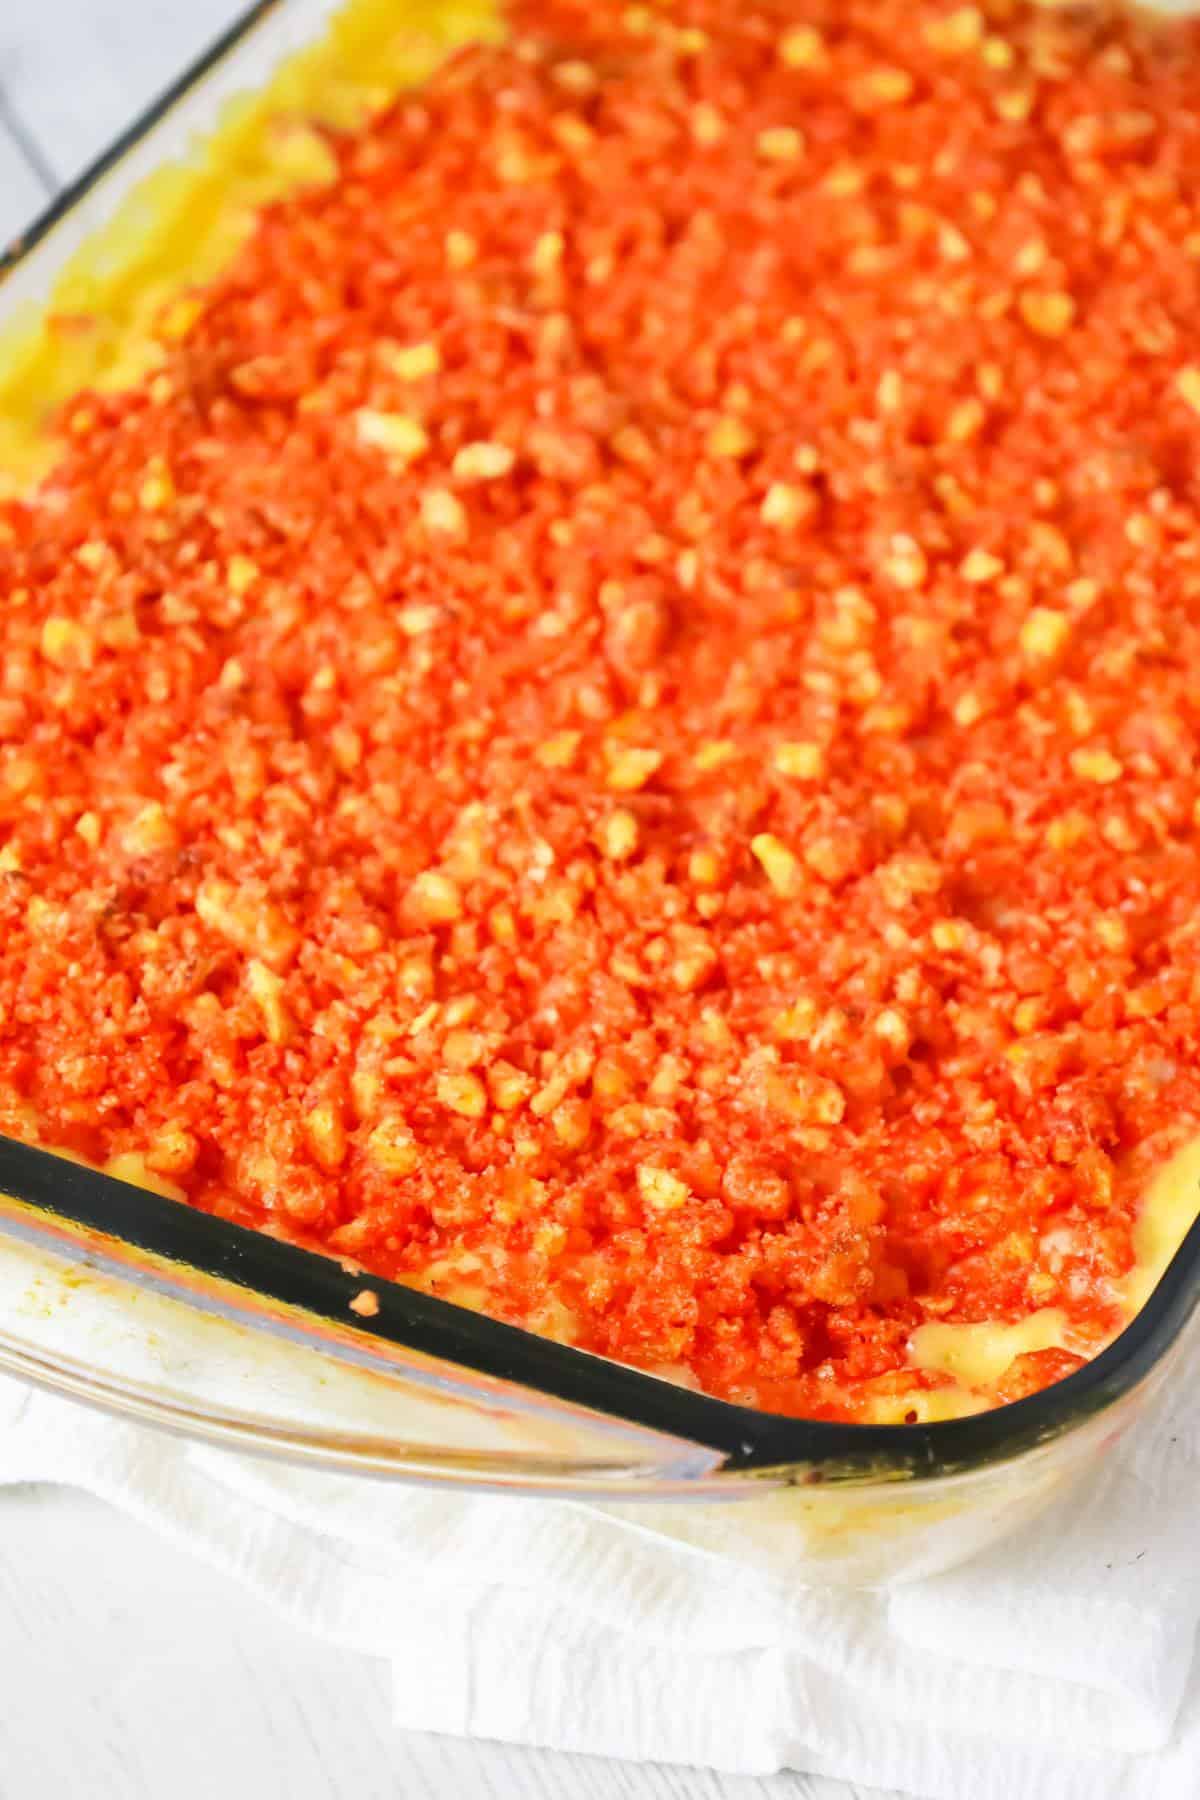 Hot Cheetos Mac and Cheese is a delicious baked pasta recipe loaded with shredded cheddar, mozzarella, banana pepper rings and topped with crumbled Flamin' Hot Cheetos.